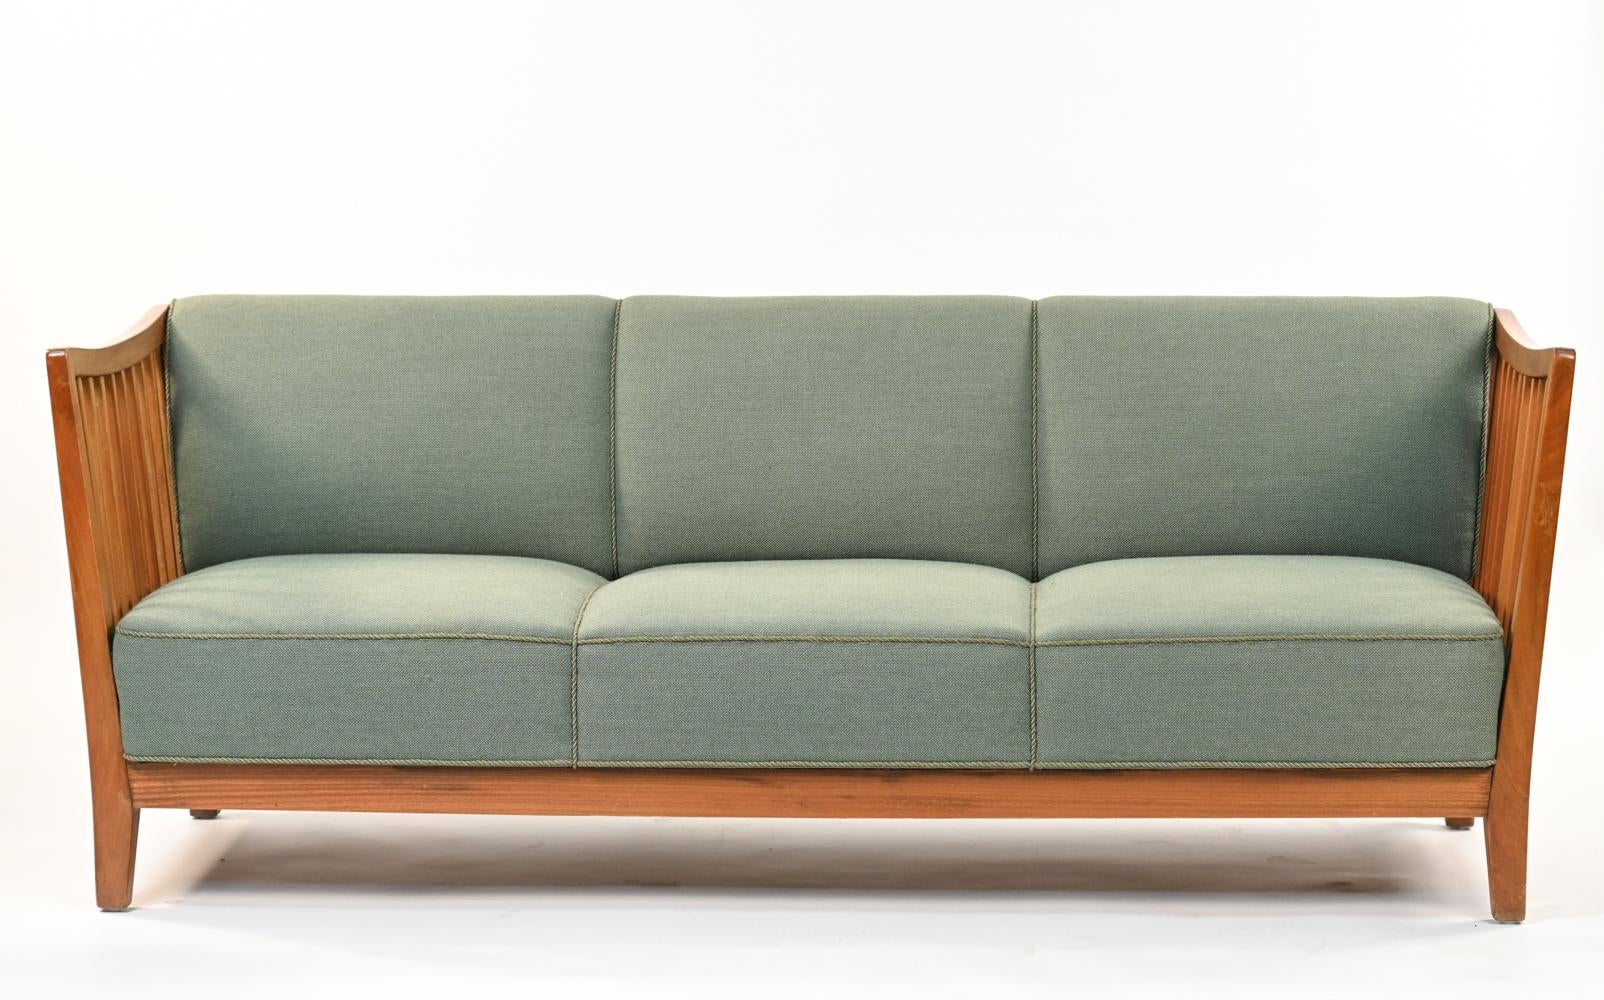 A Danish mid-century three-seater sofa in the manner of designer Carl Malmsten. Featuring jade green wool upholstery with piped trim, with Danish upholstery label underneath. The mahogany frame features squared spindle sides.